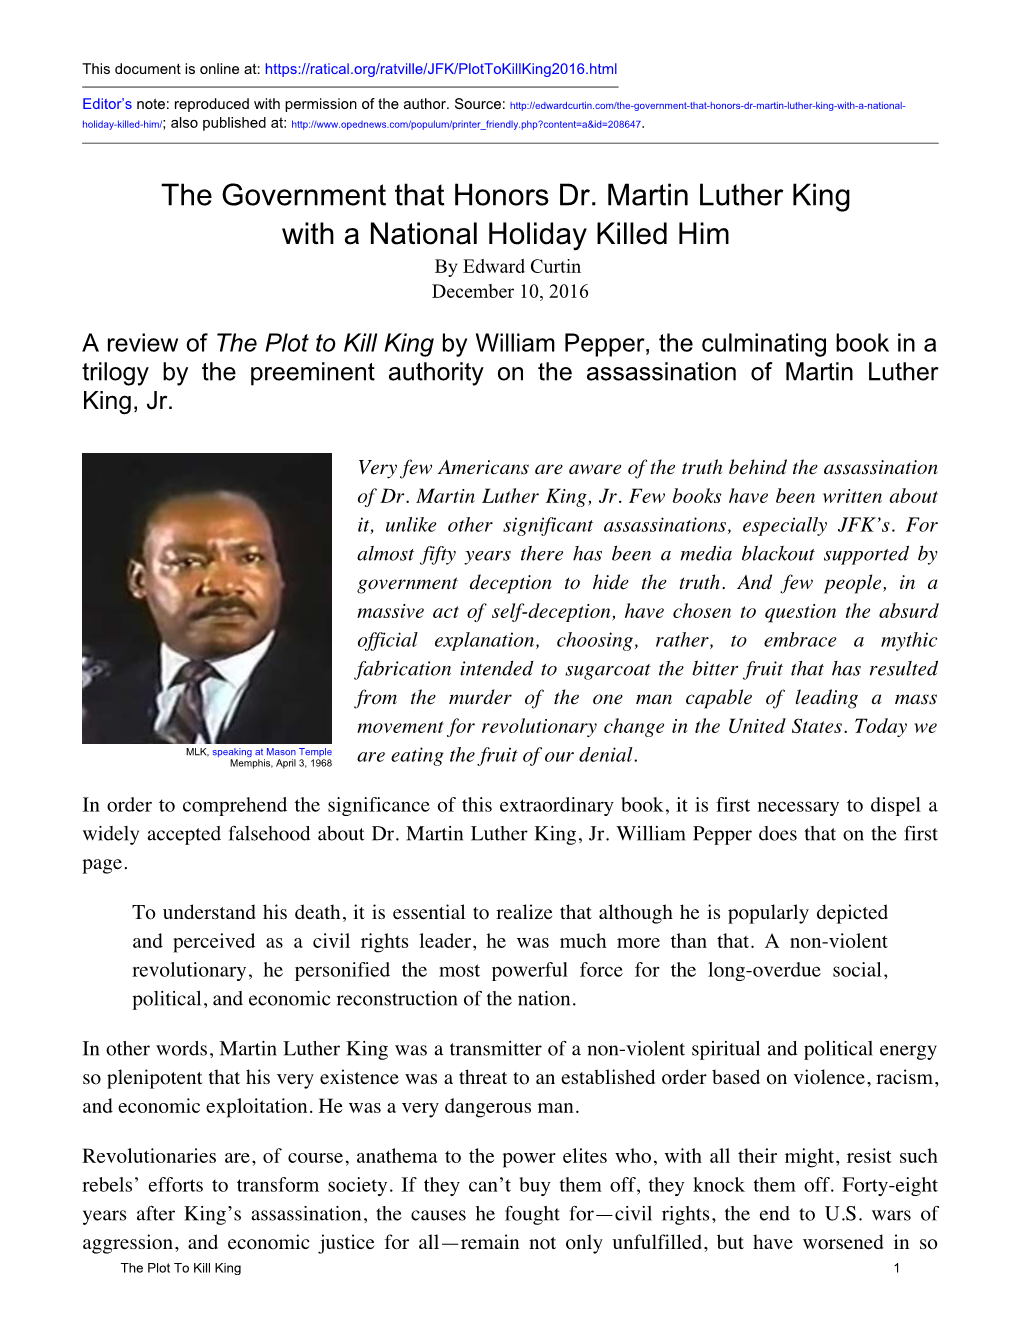 The Government That Honors Dr. Martin Luther King with a National Holiday Killed Him by Edward Curtin December 10, 2016